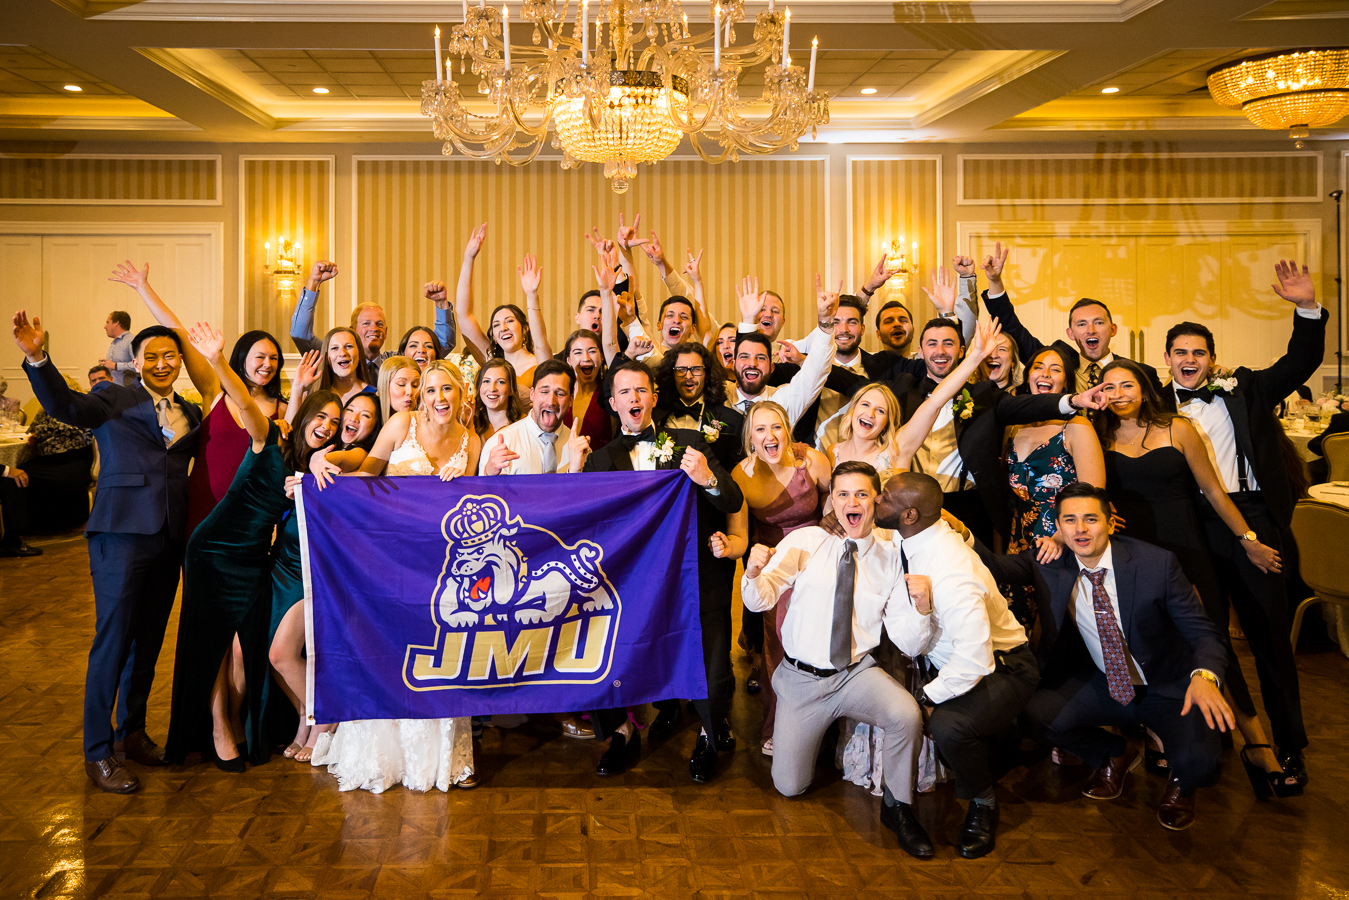 image of the bride and groom with all of their friends from james madision university on the dance floor together at this wedding reception in york pa